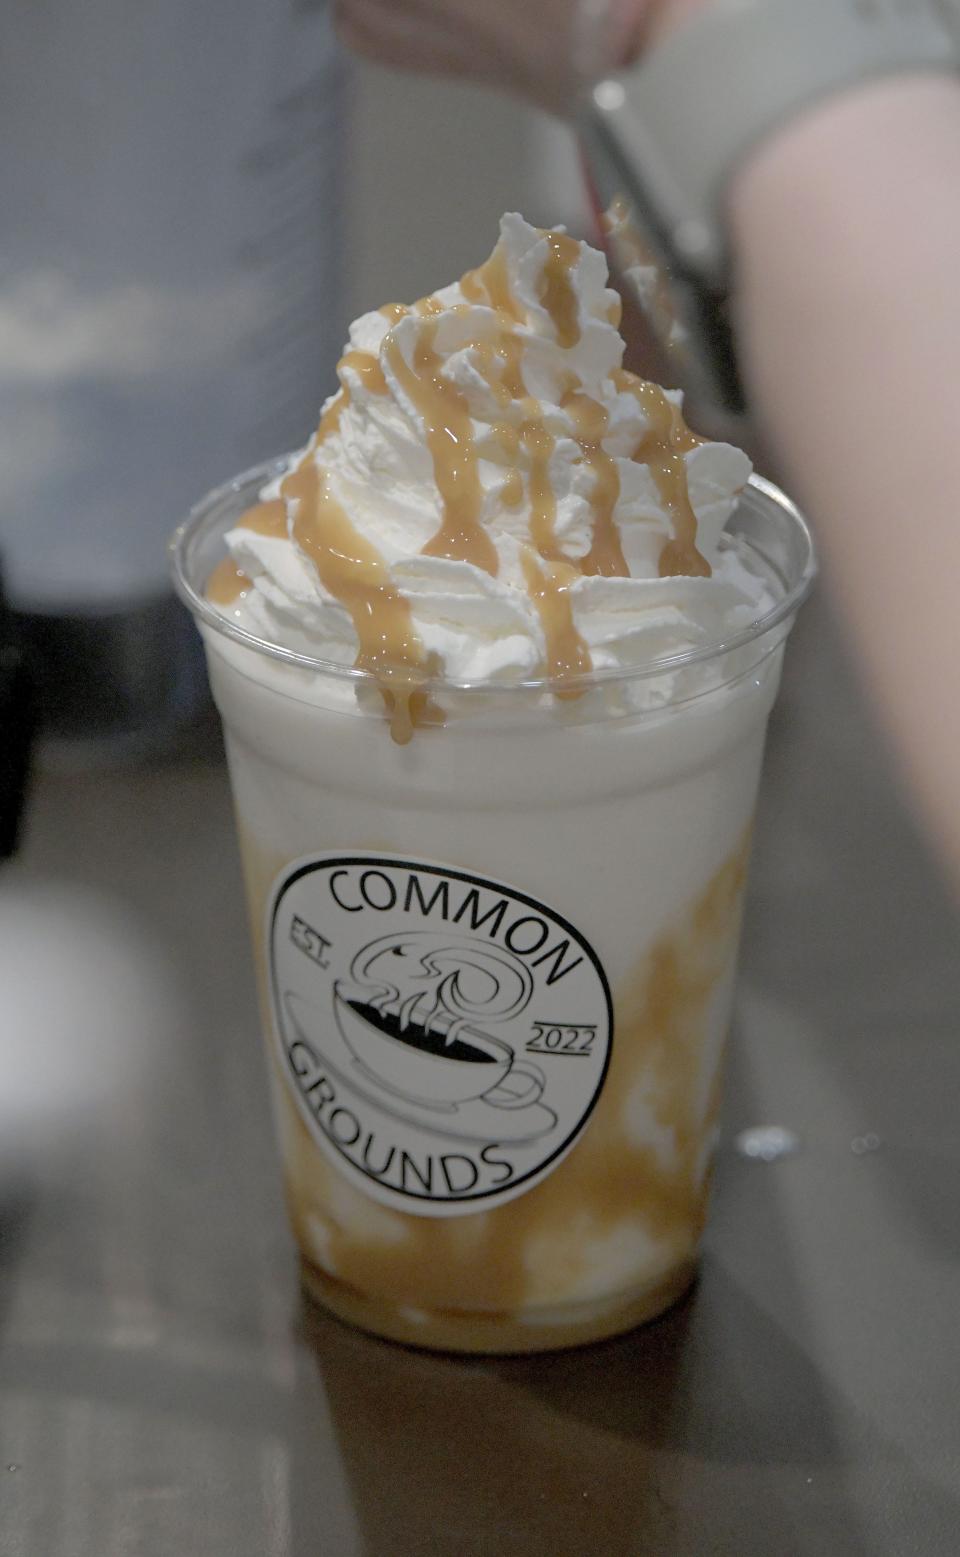 A Ramachino from Common Grounds.